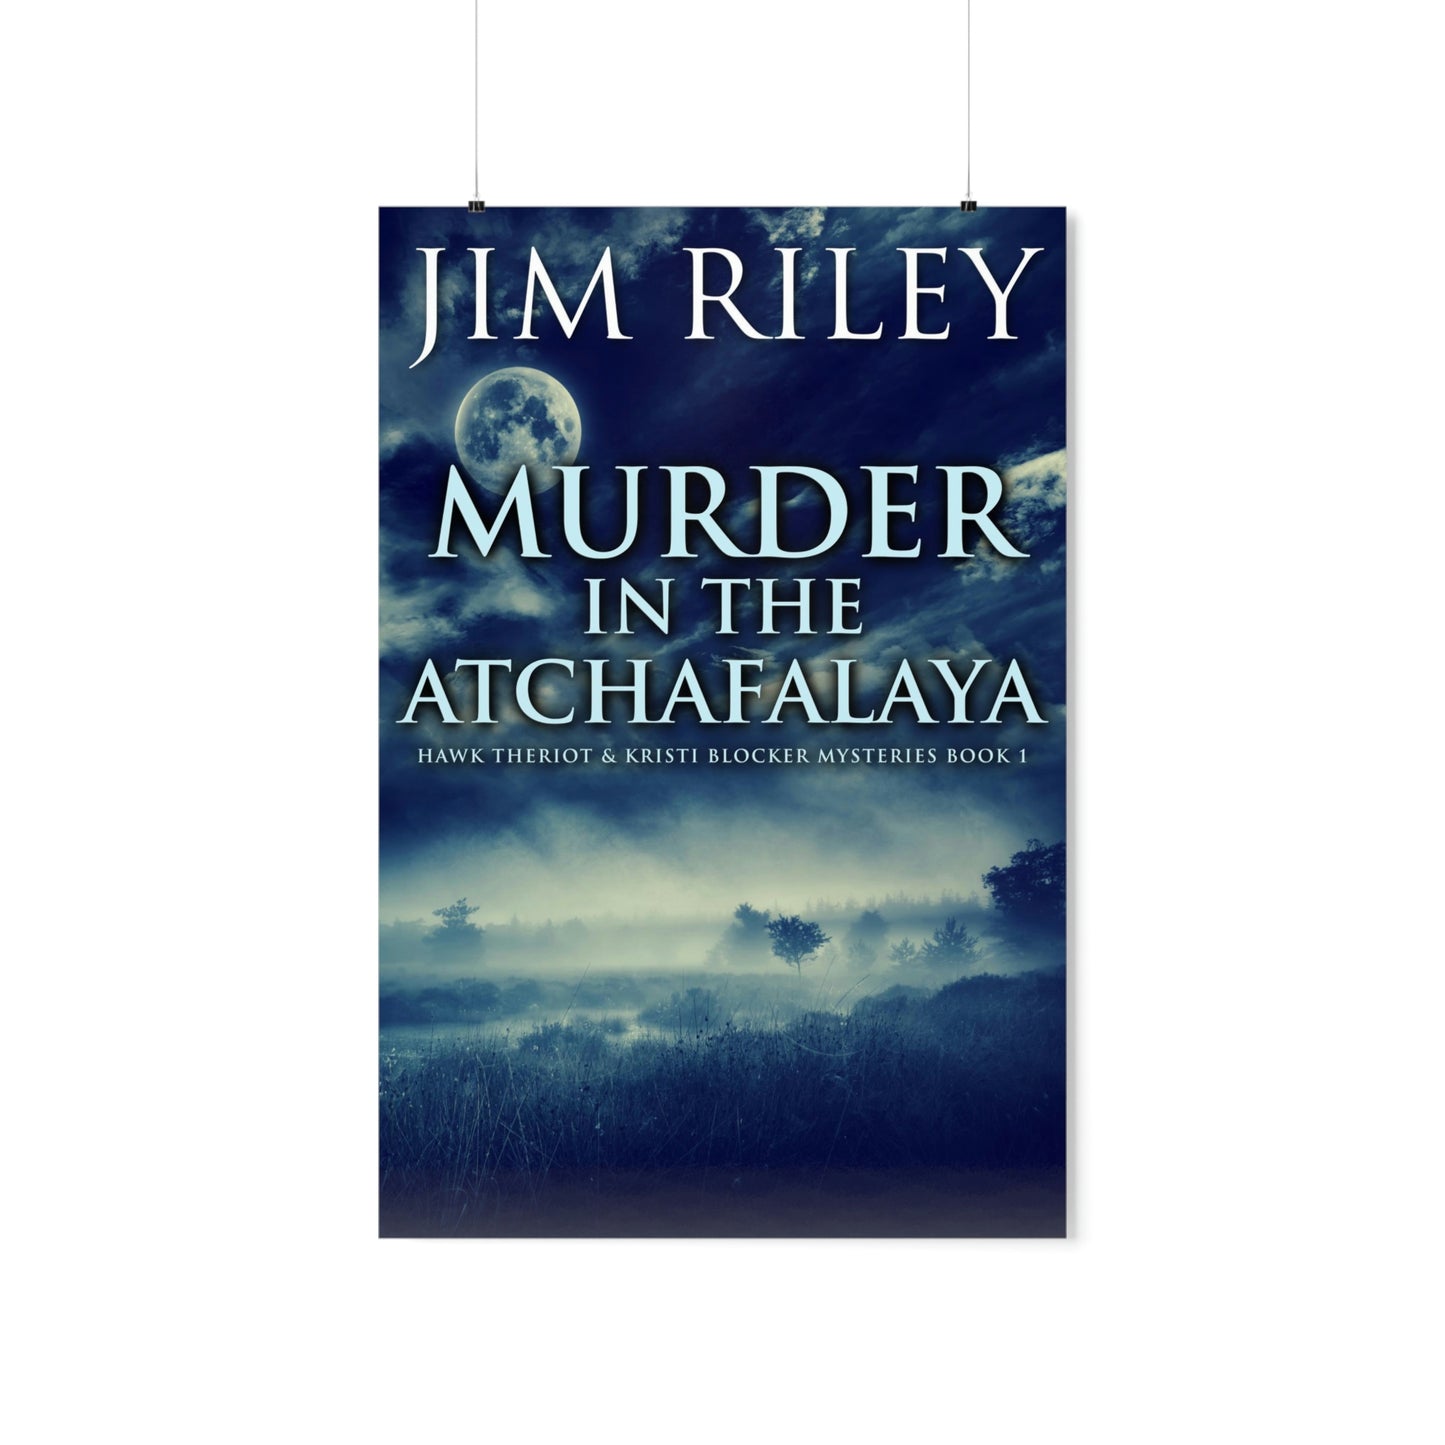 Murder in the Atchafalaya - Matte Poster